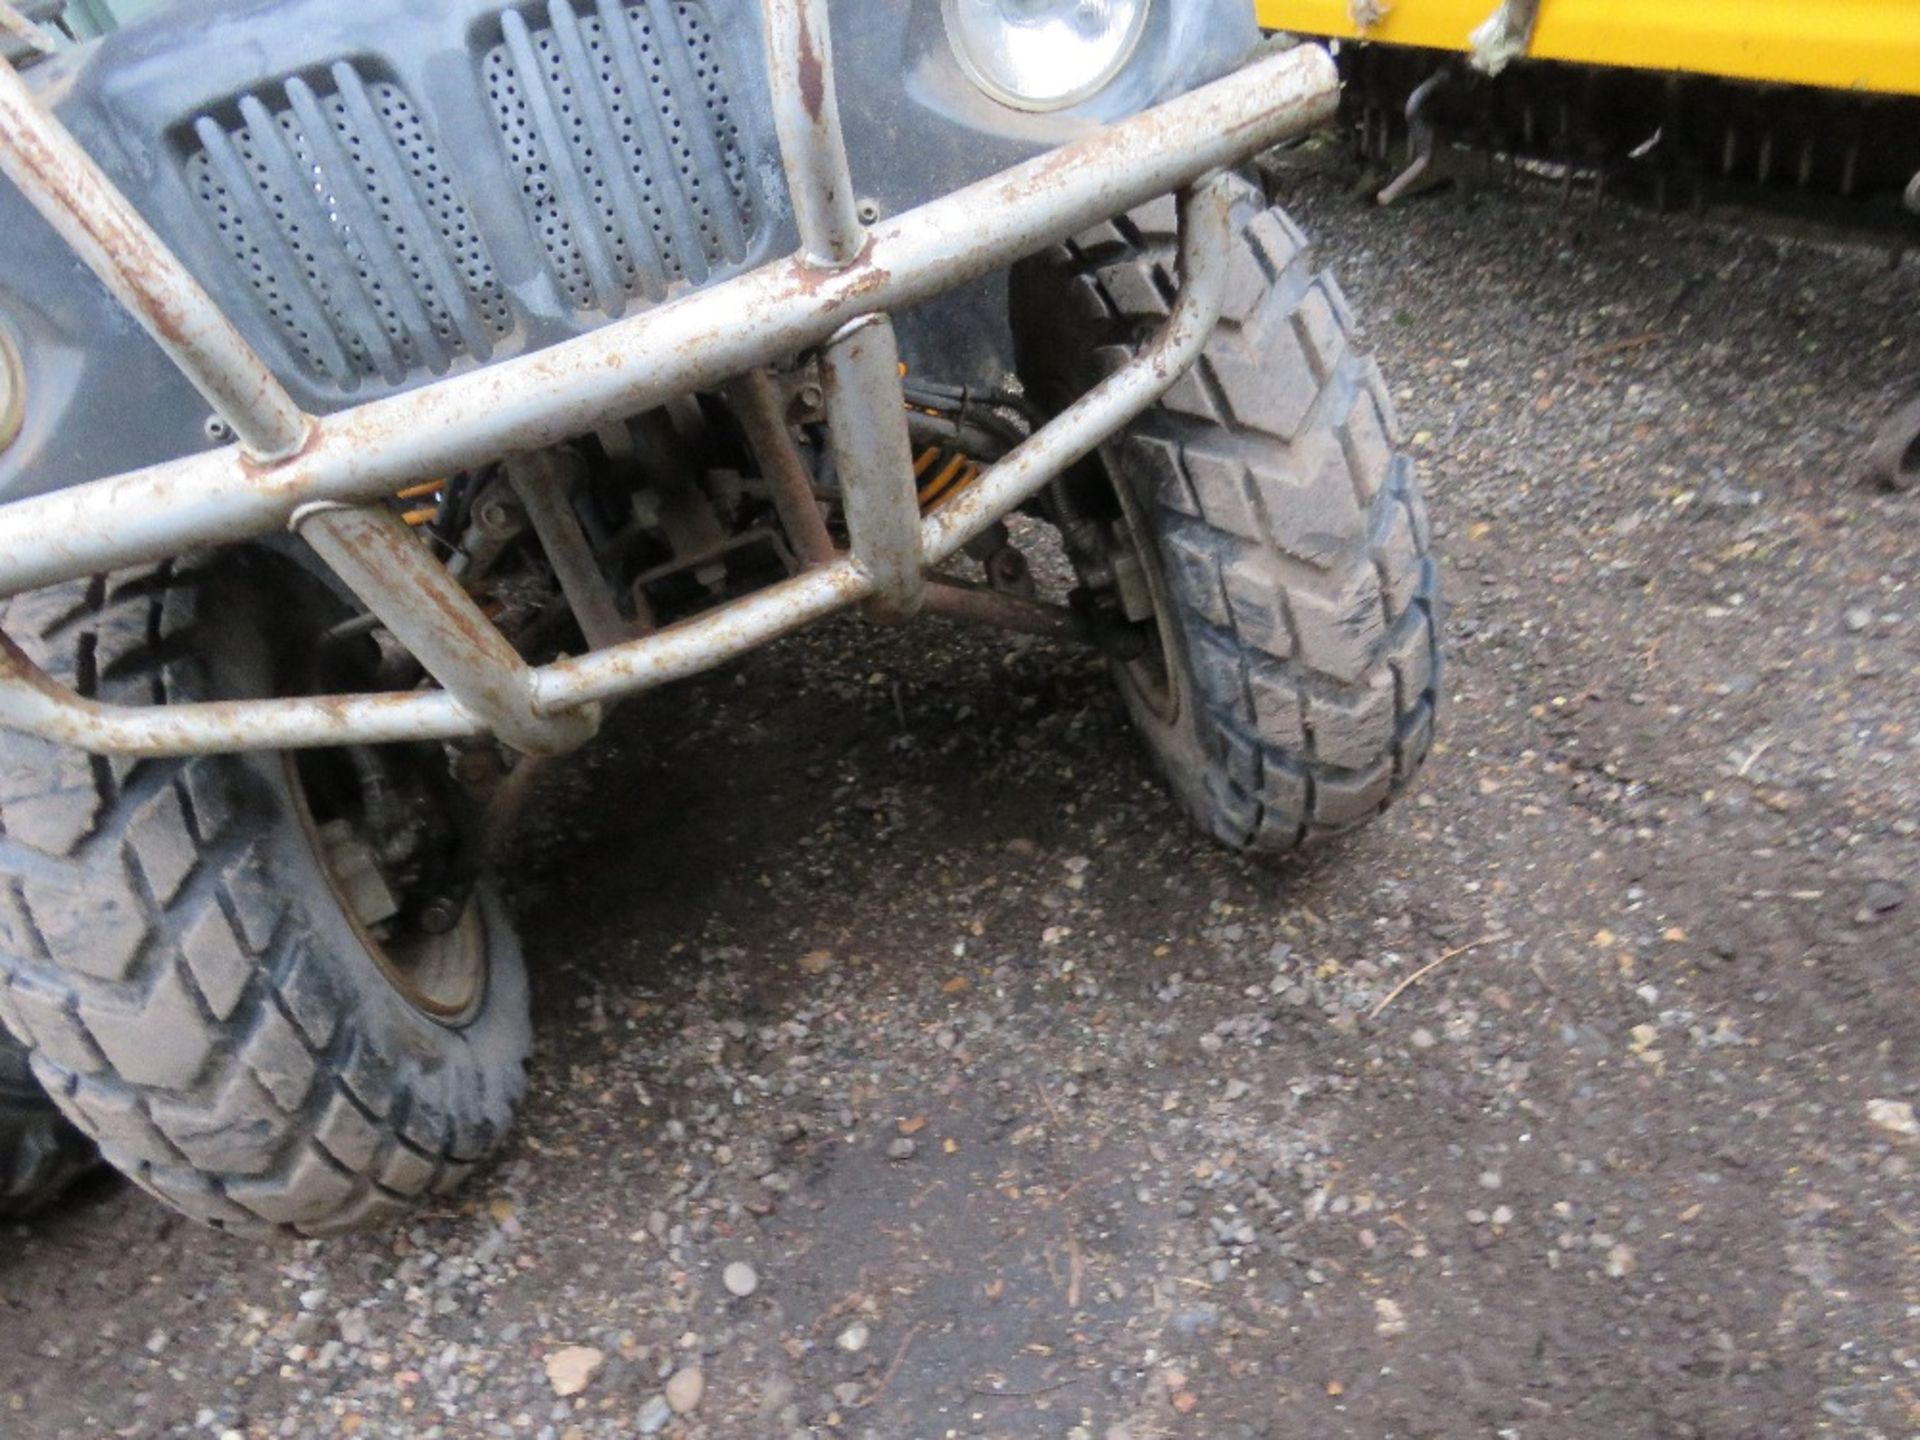 QUANTUM NF150 AUTO QUAD BIKE. WHEN TESTED WAS SEEN TO RUN AND DRIVE, STEER AND BRAKE BUT NEEDS ATTEN - Image 2 of 6